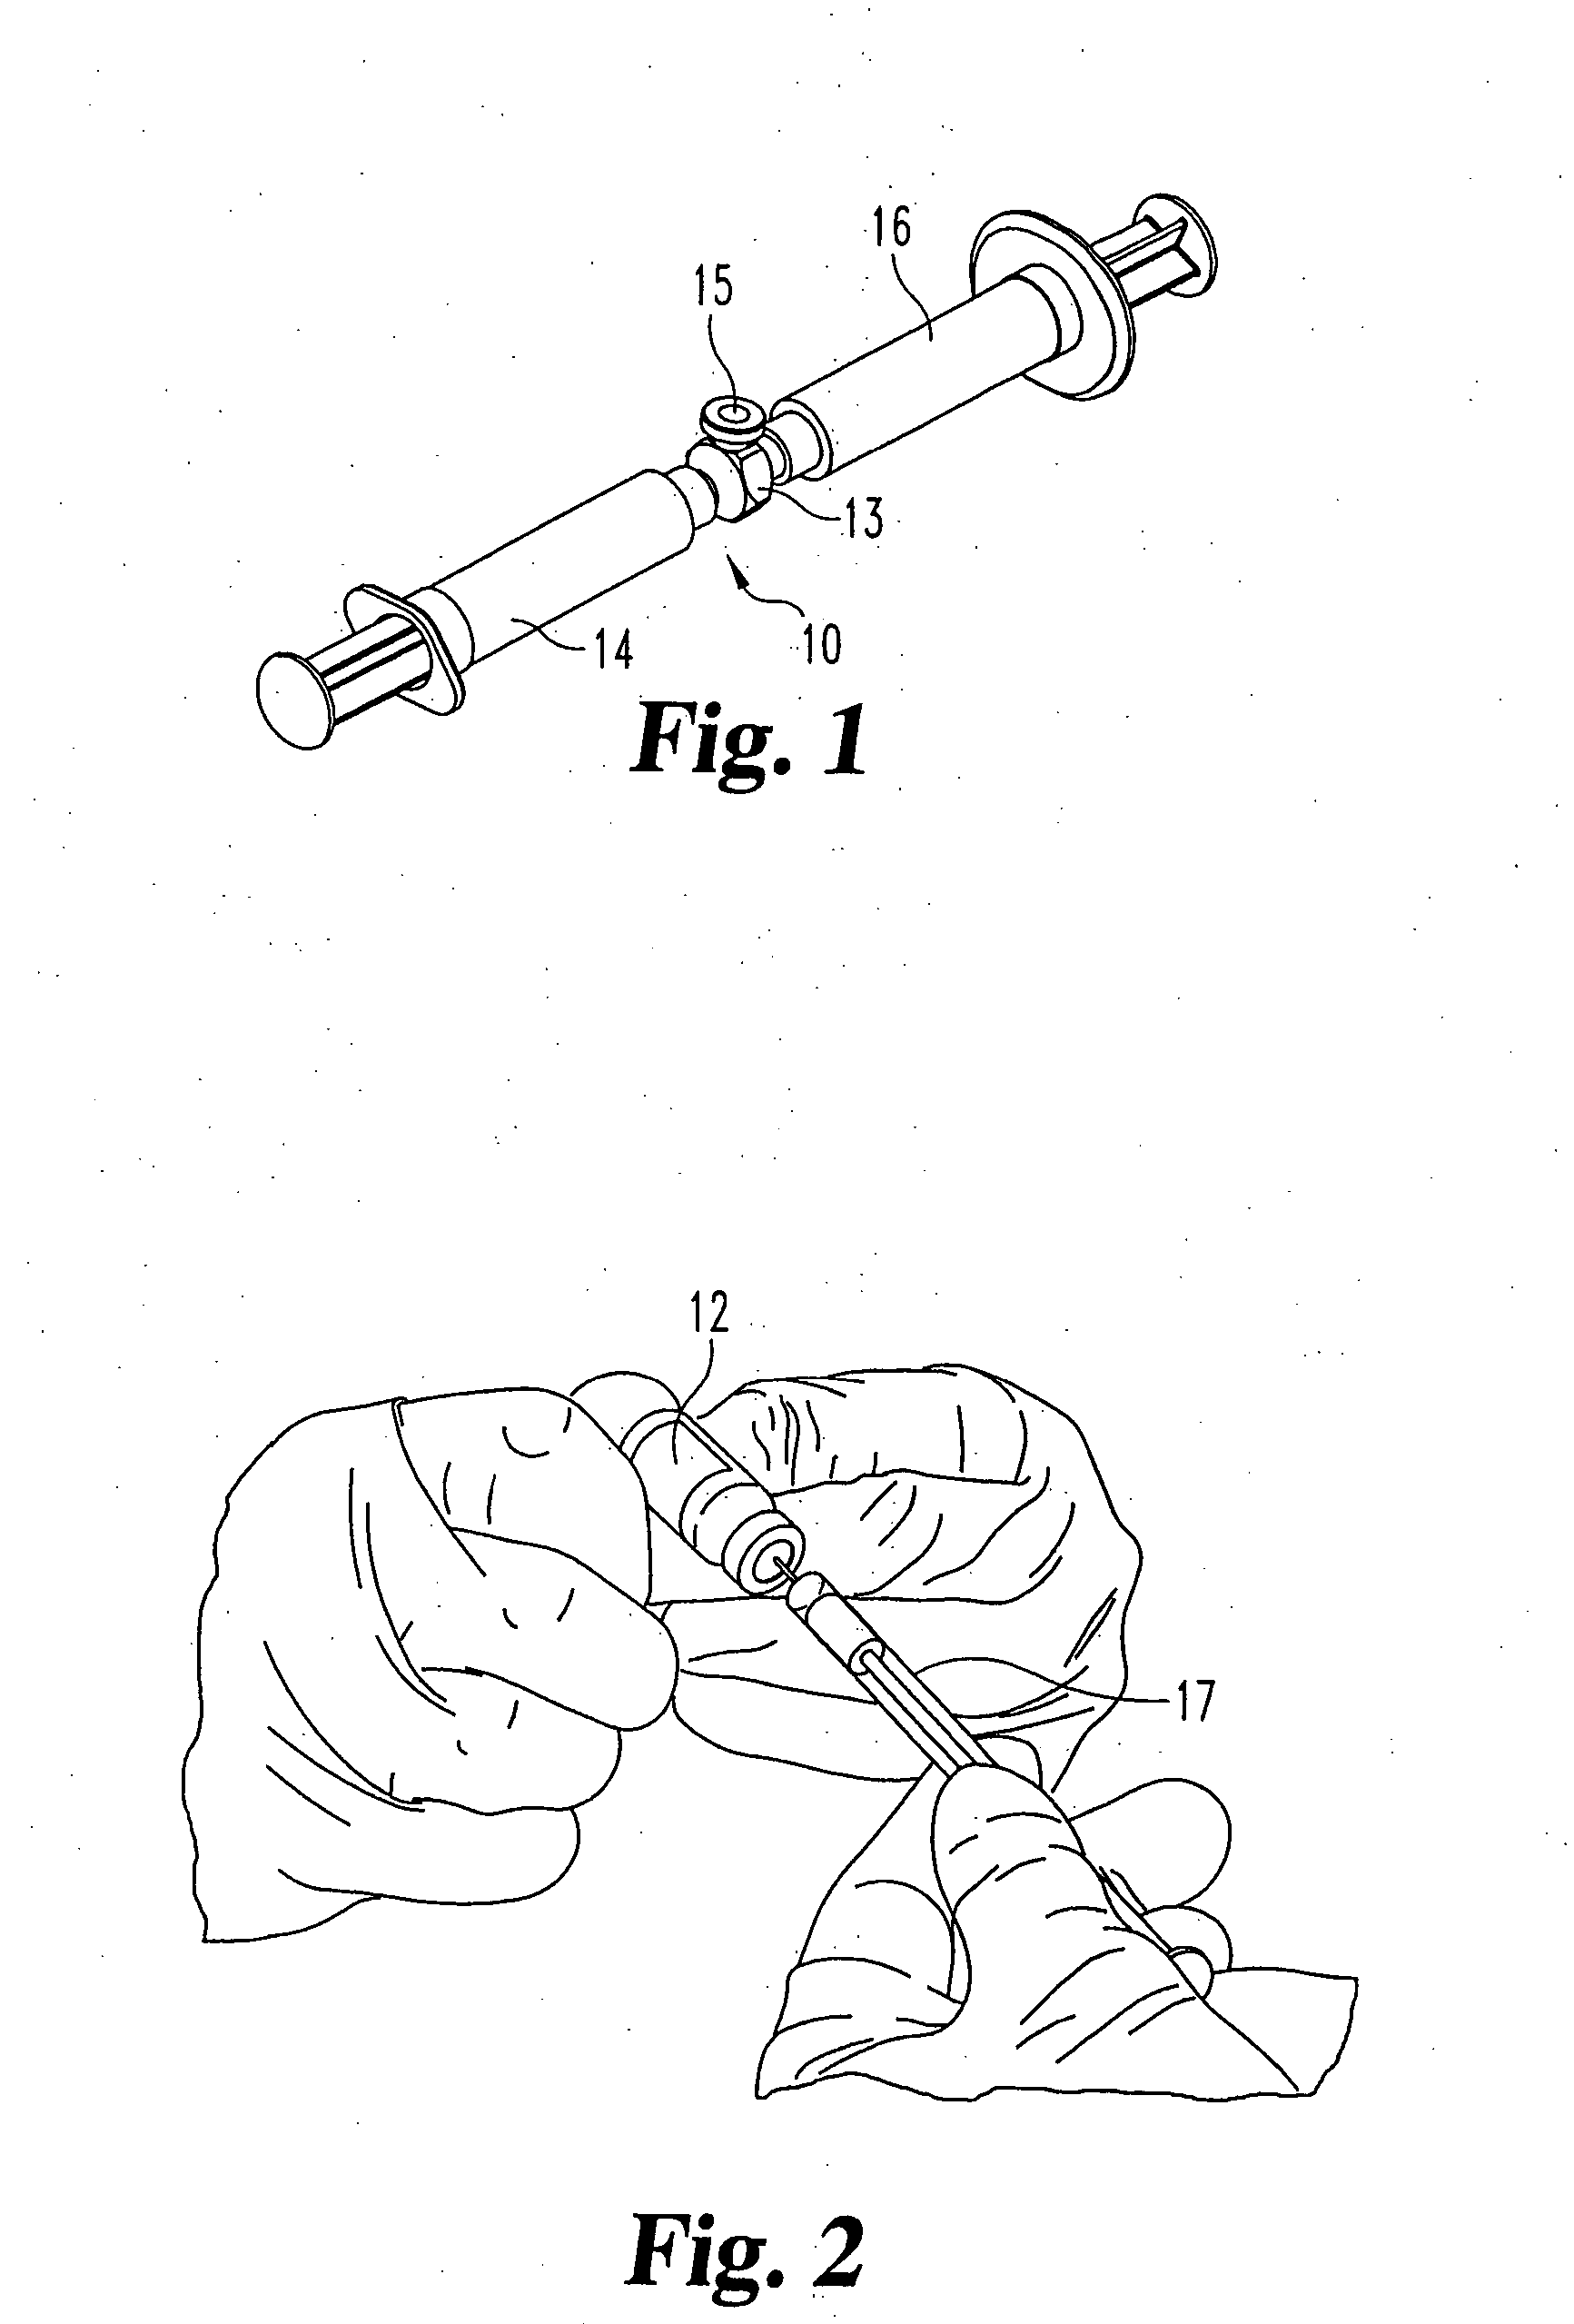 Methods for treating defects and injuries of an intervertebral disc